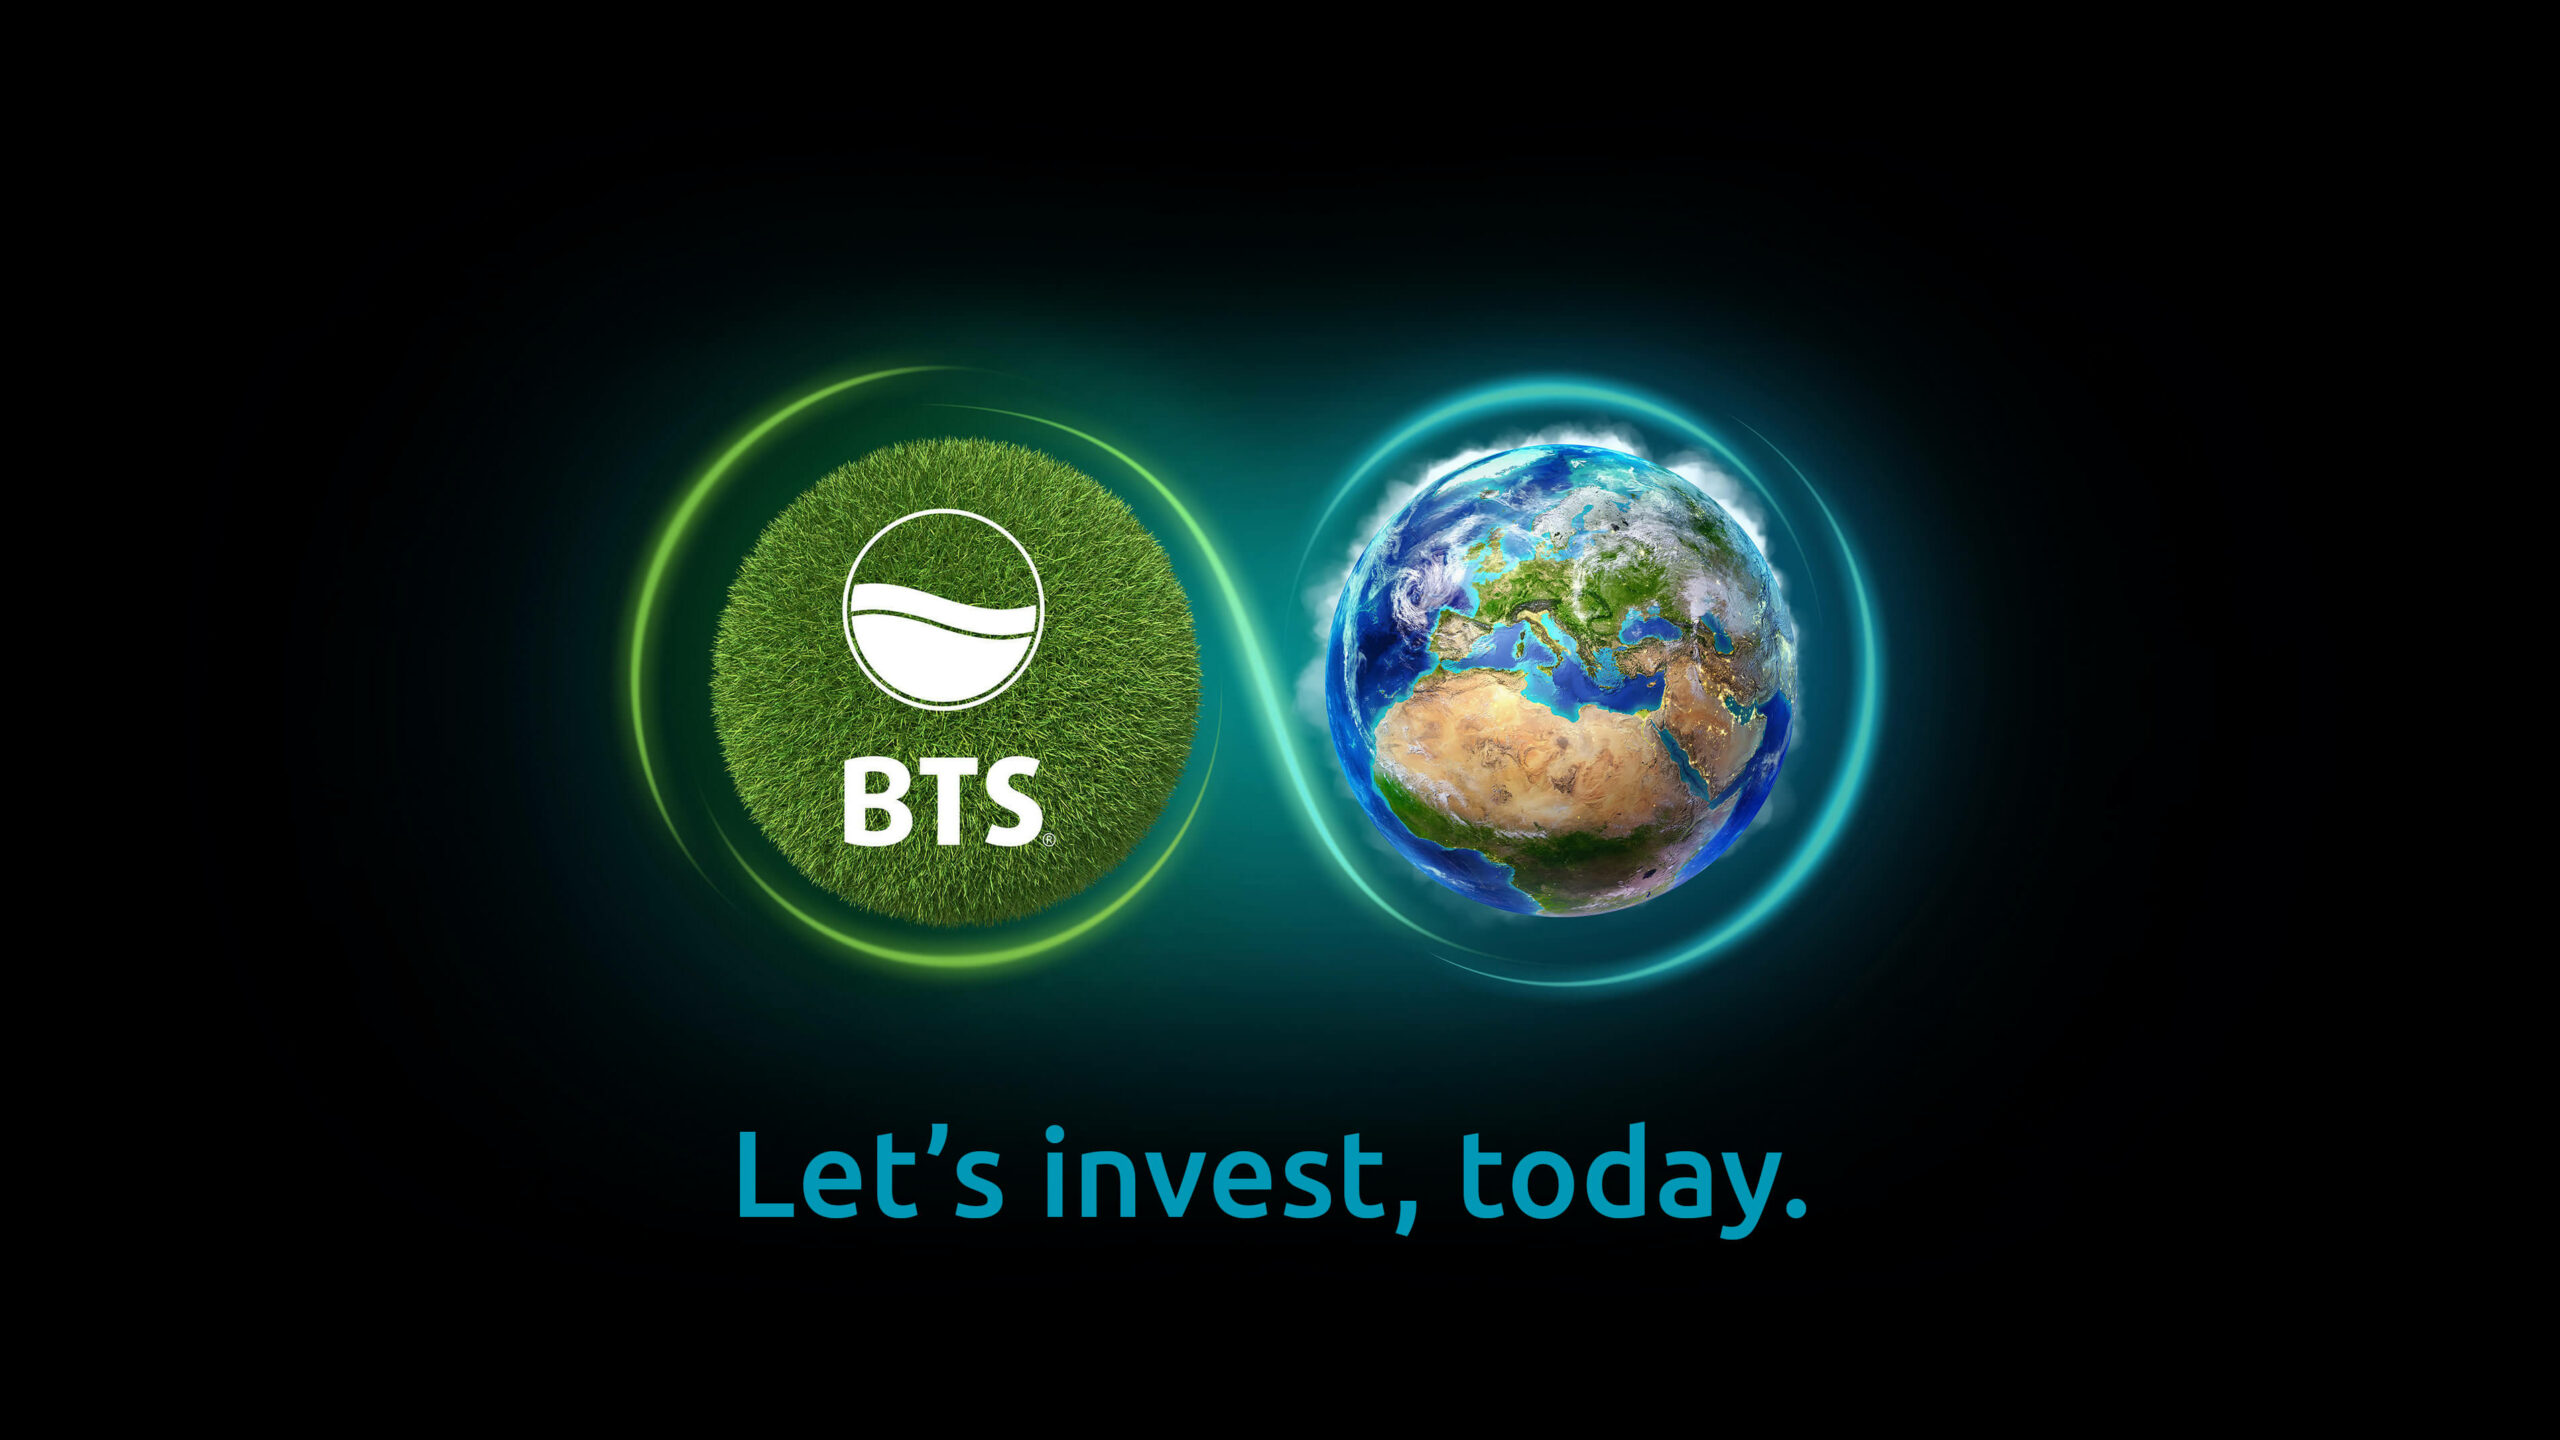 Featured image for “BTS Biogas expands its business model by entering the market as an investor”